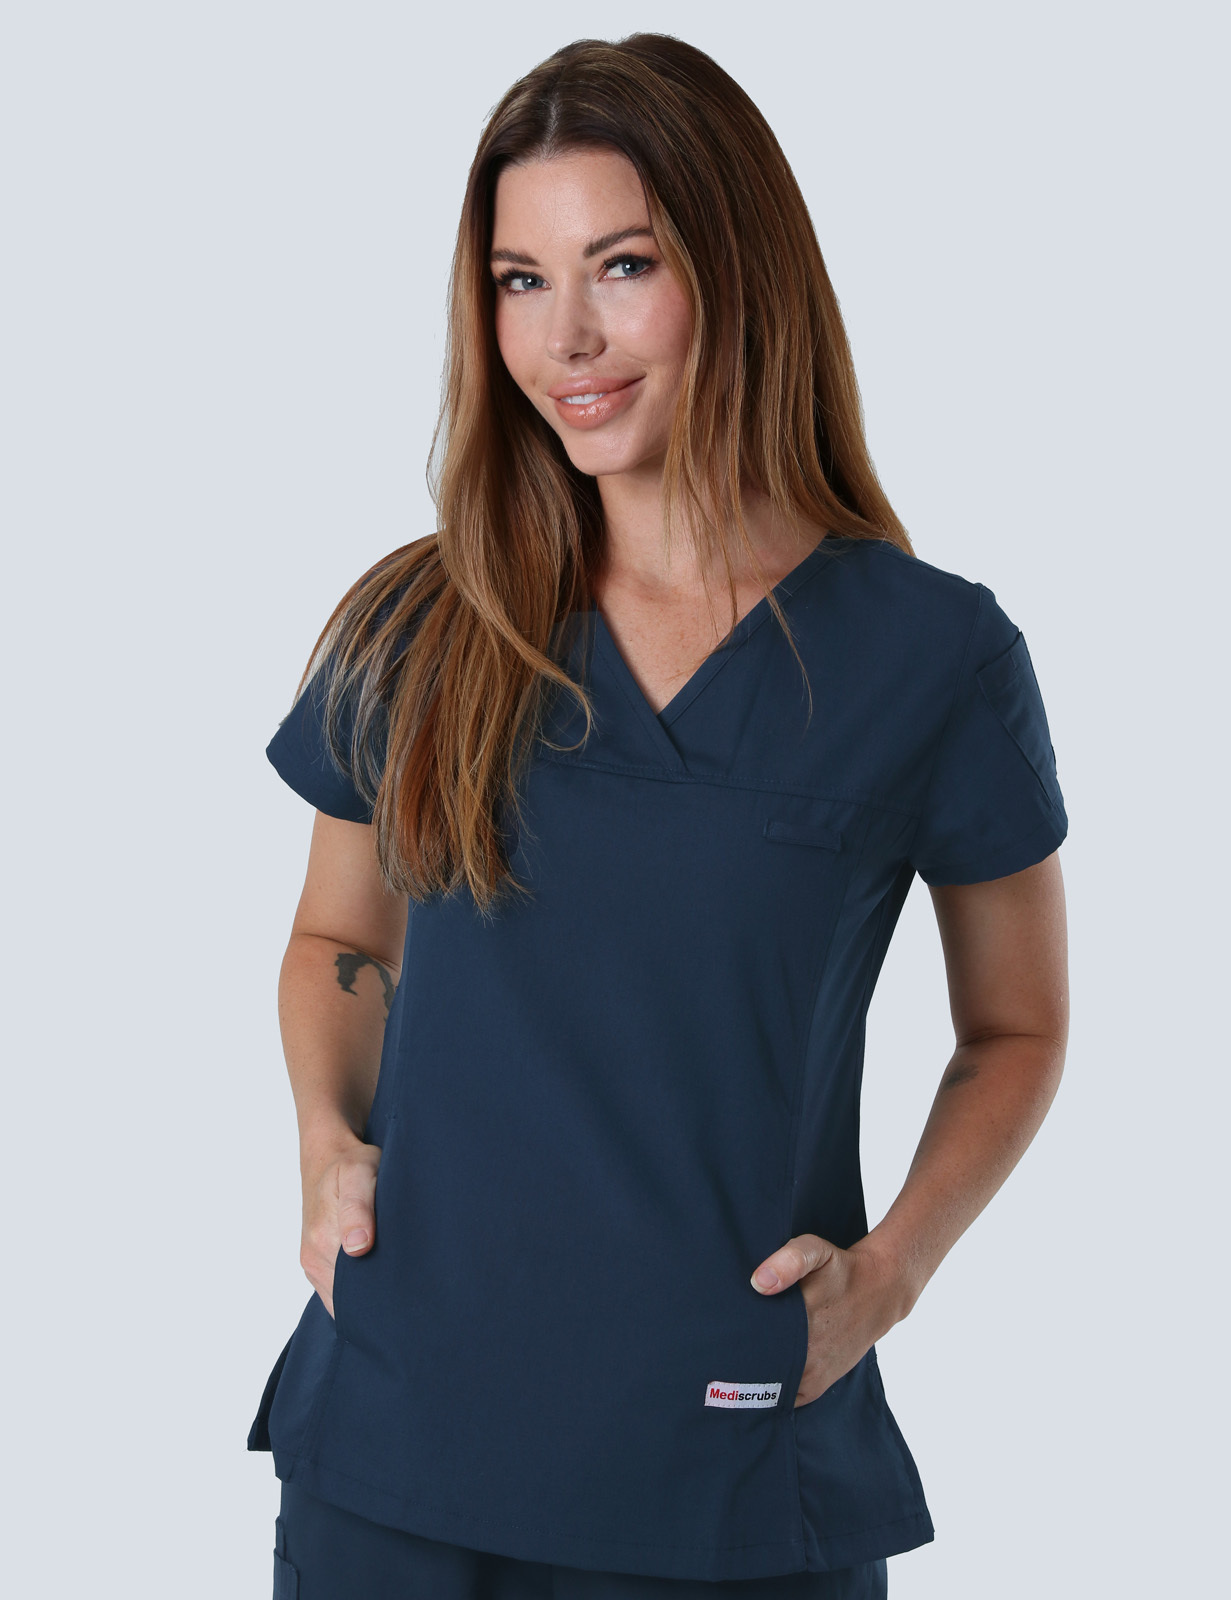 Women's Fit Solid - SCHHS - Nambour Hospital - Registered Nurse (Women's Fit Solid with Cargo in Navy + Logos)